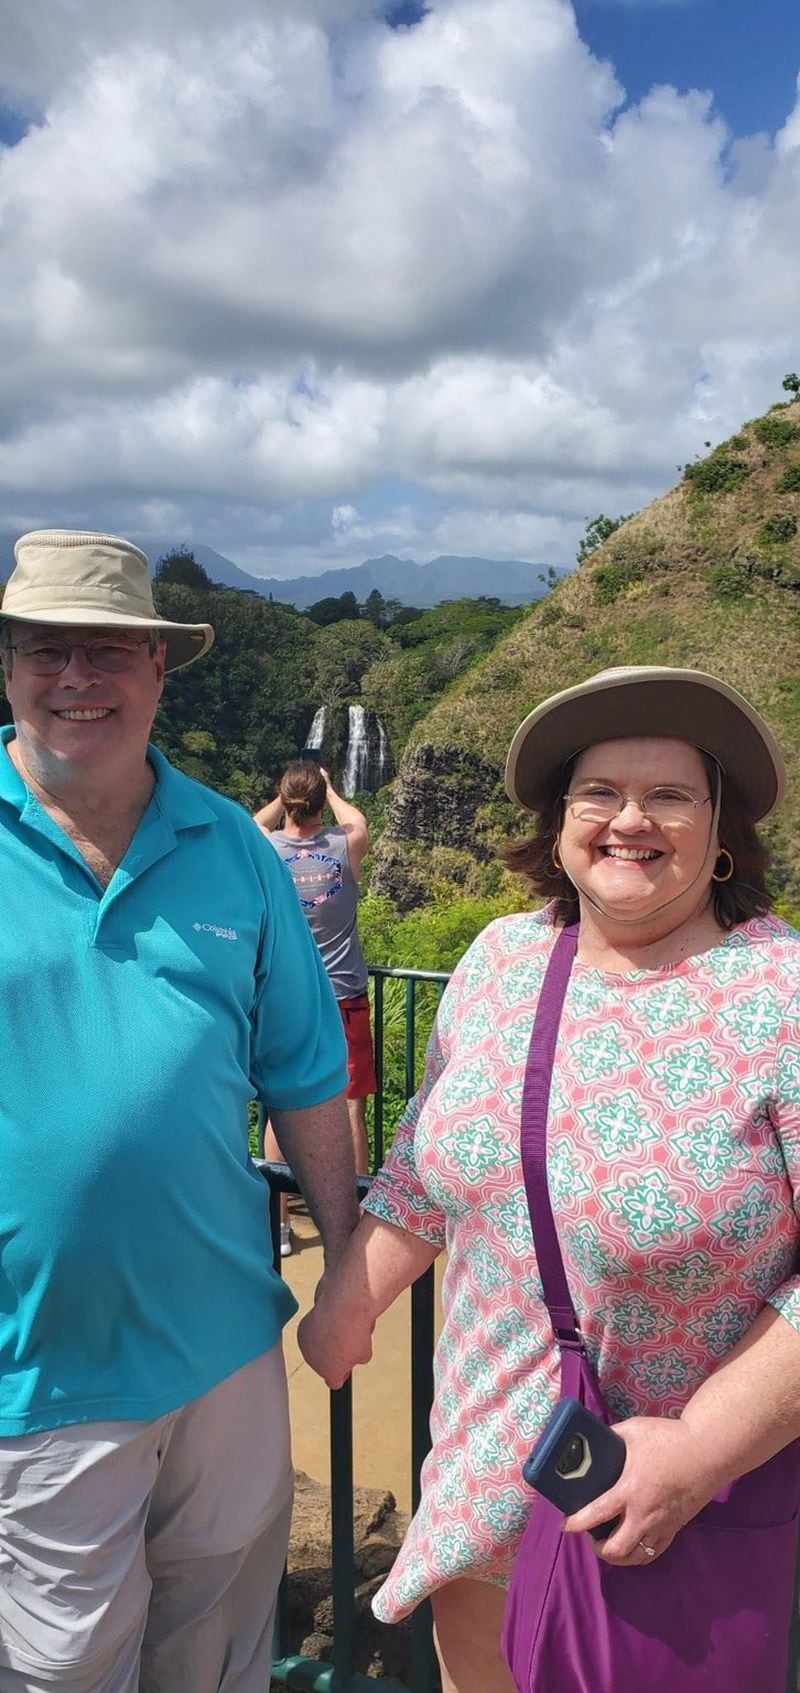 June and Len Brooks loved taking cruises to travel the globe. Here they are on their latest cruise to Hawaii in February which was cut short by the coronavirus. They were confined to their room on the ship for five days and then flown to San Antonio to go into quarantine for 14 days at Lackland Air Force Base.CONTRIBUTED